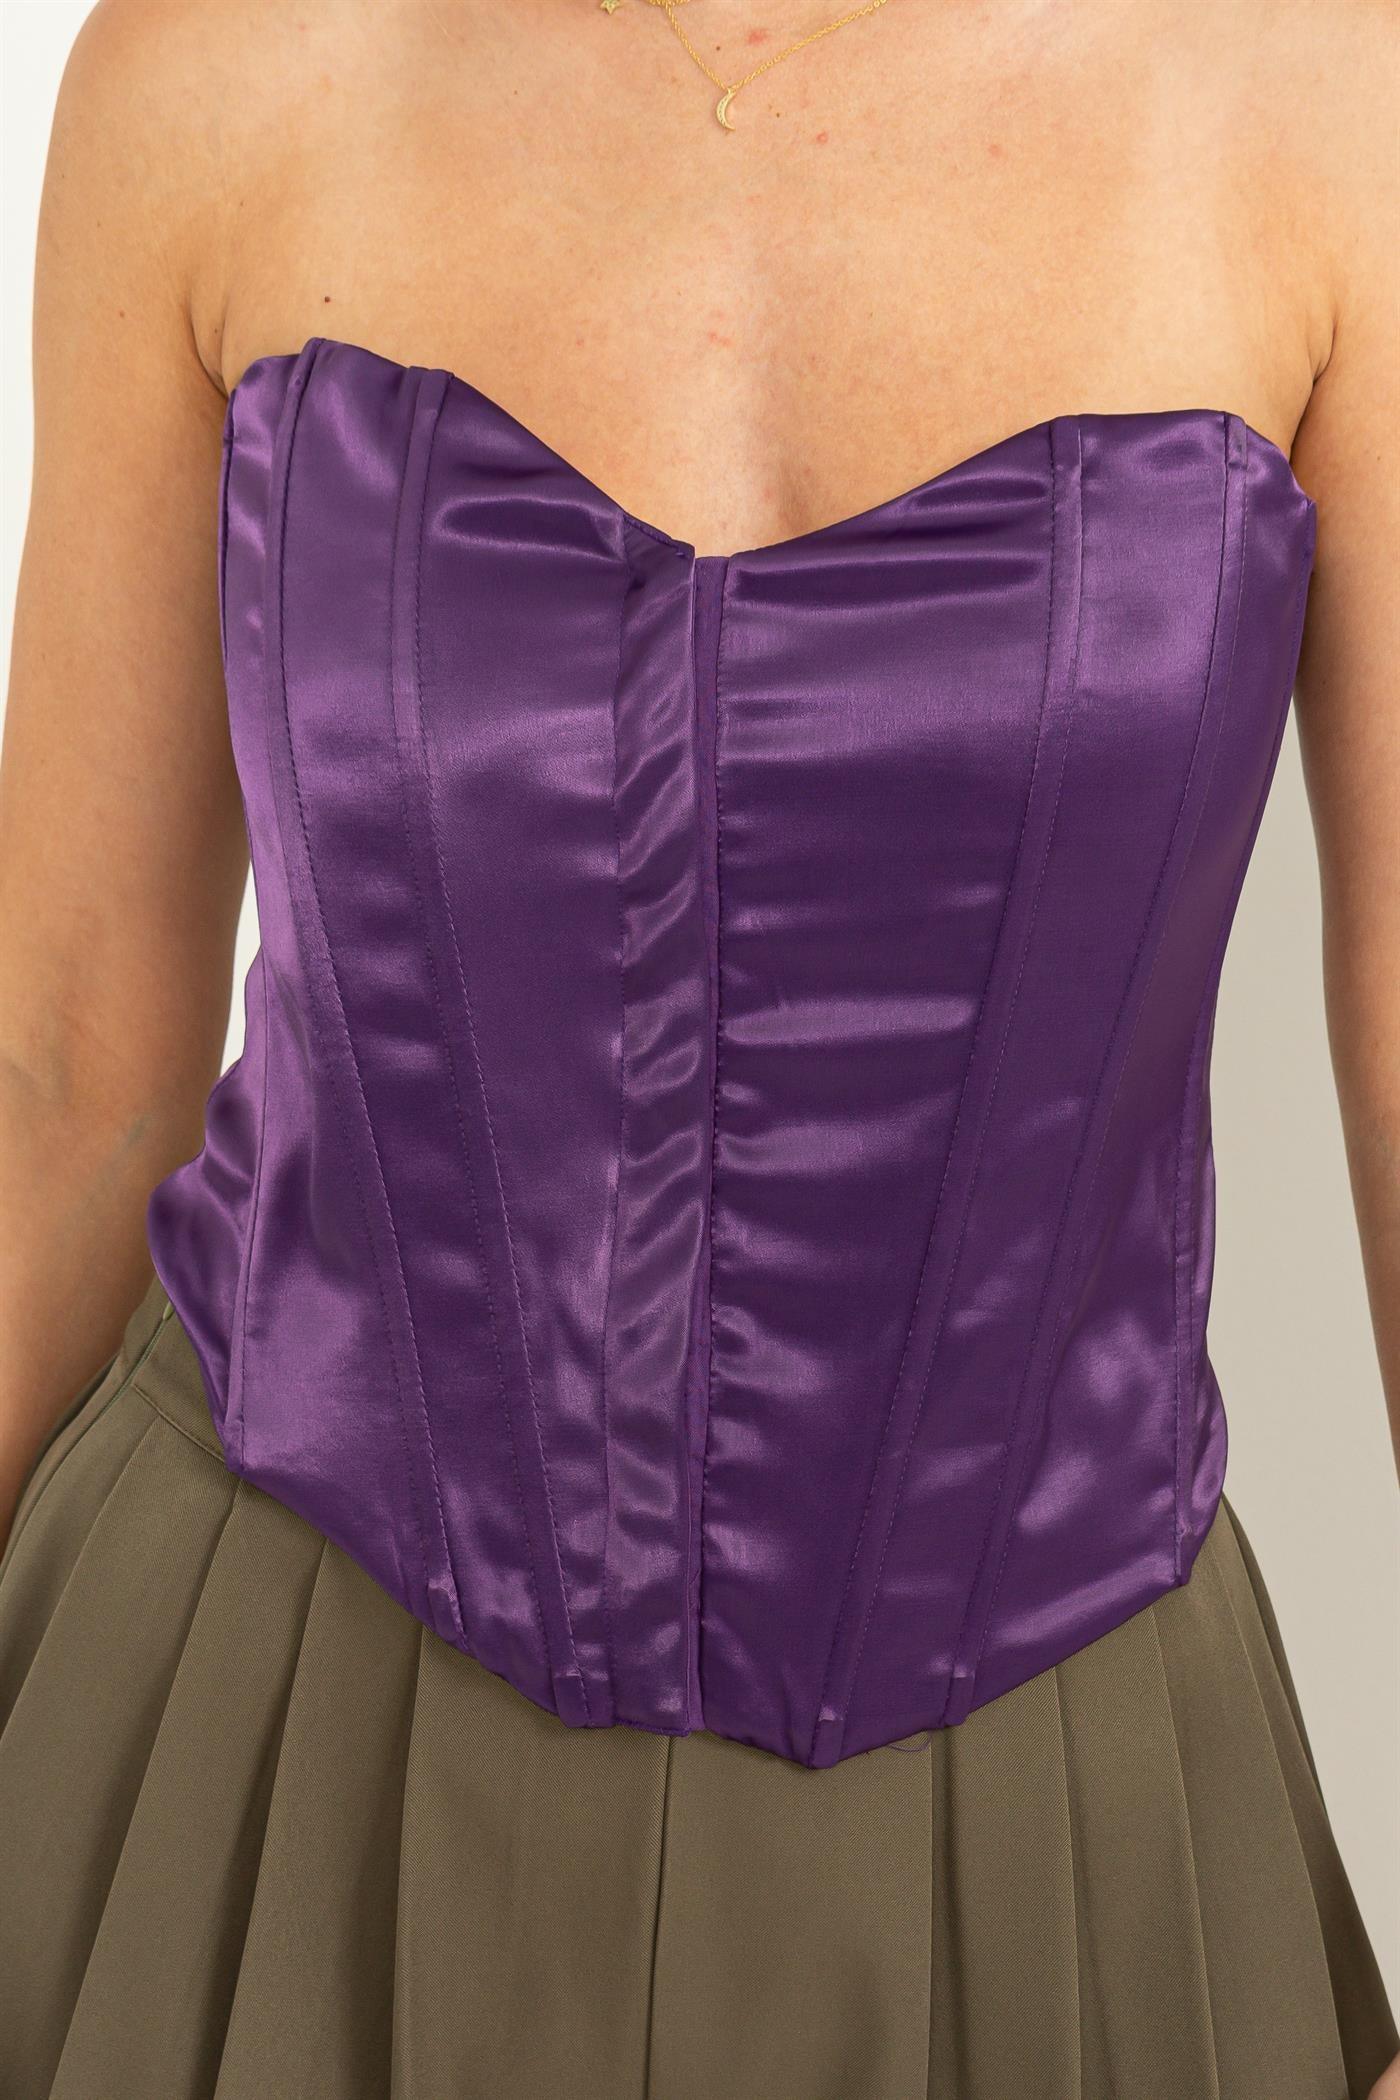 strapless corset bustier top - RK Collections Boutique